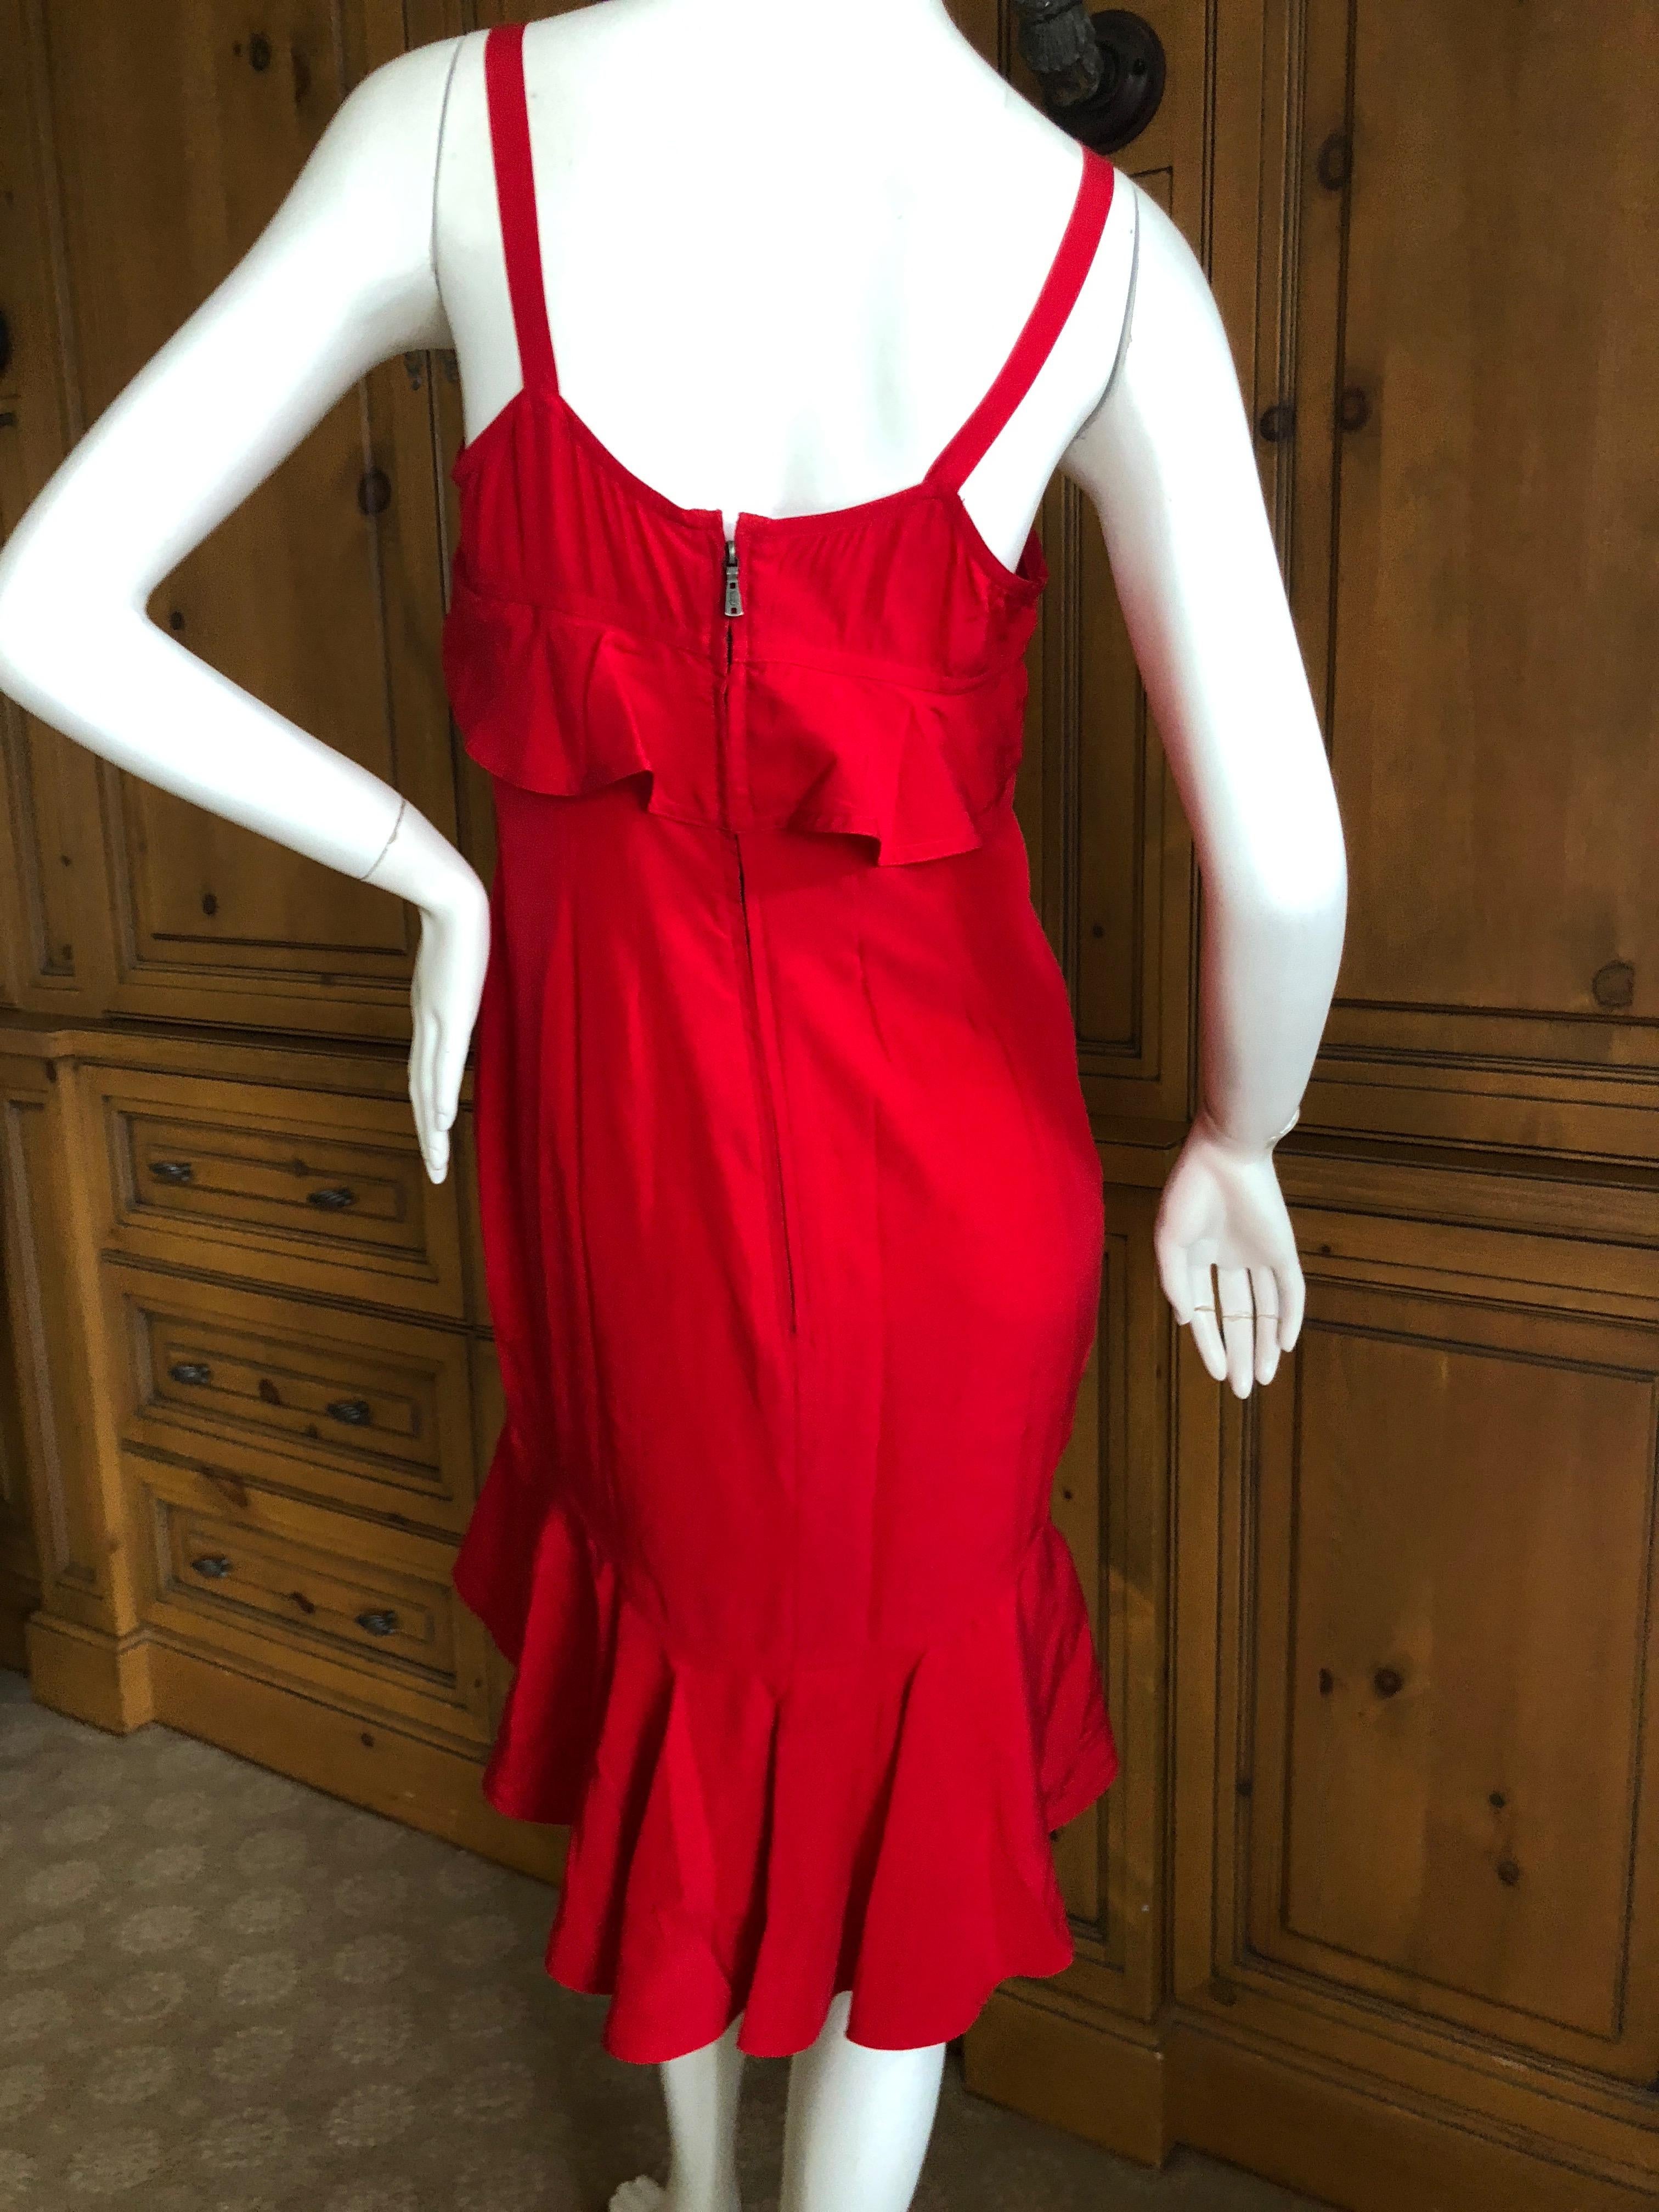 Yves Saint Laurent Tom Ford Fall 2003 Look 1 Red Ruffle Silk Dress For Sale 3